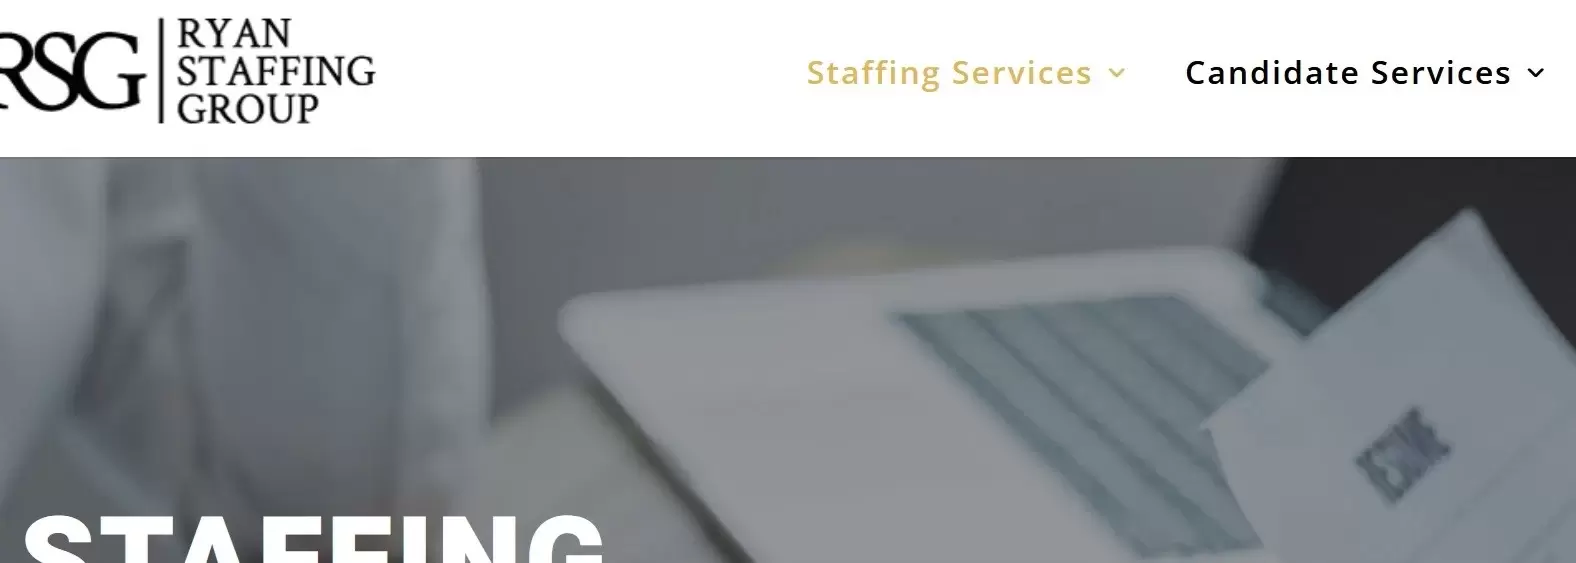 Ryan Staffing Group company profile and reviews